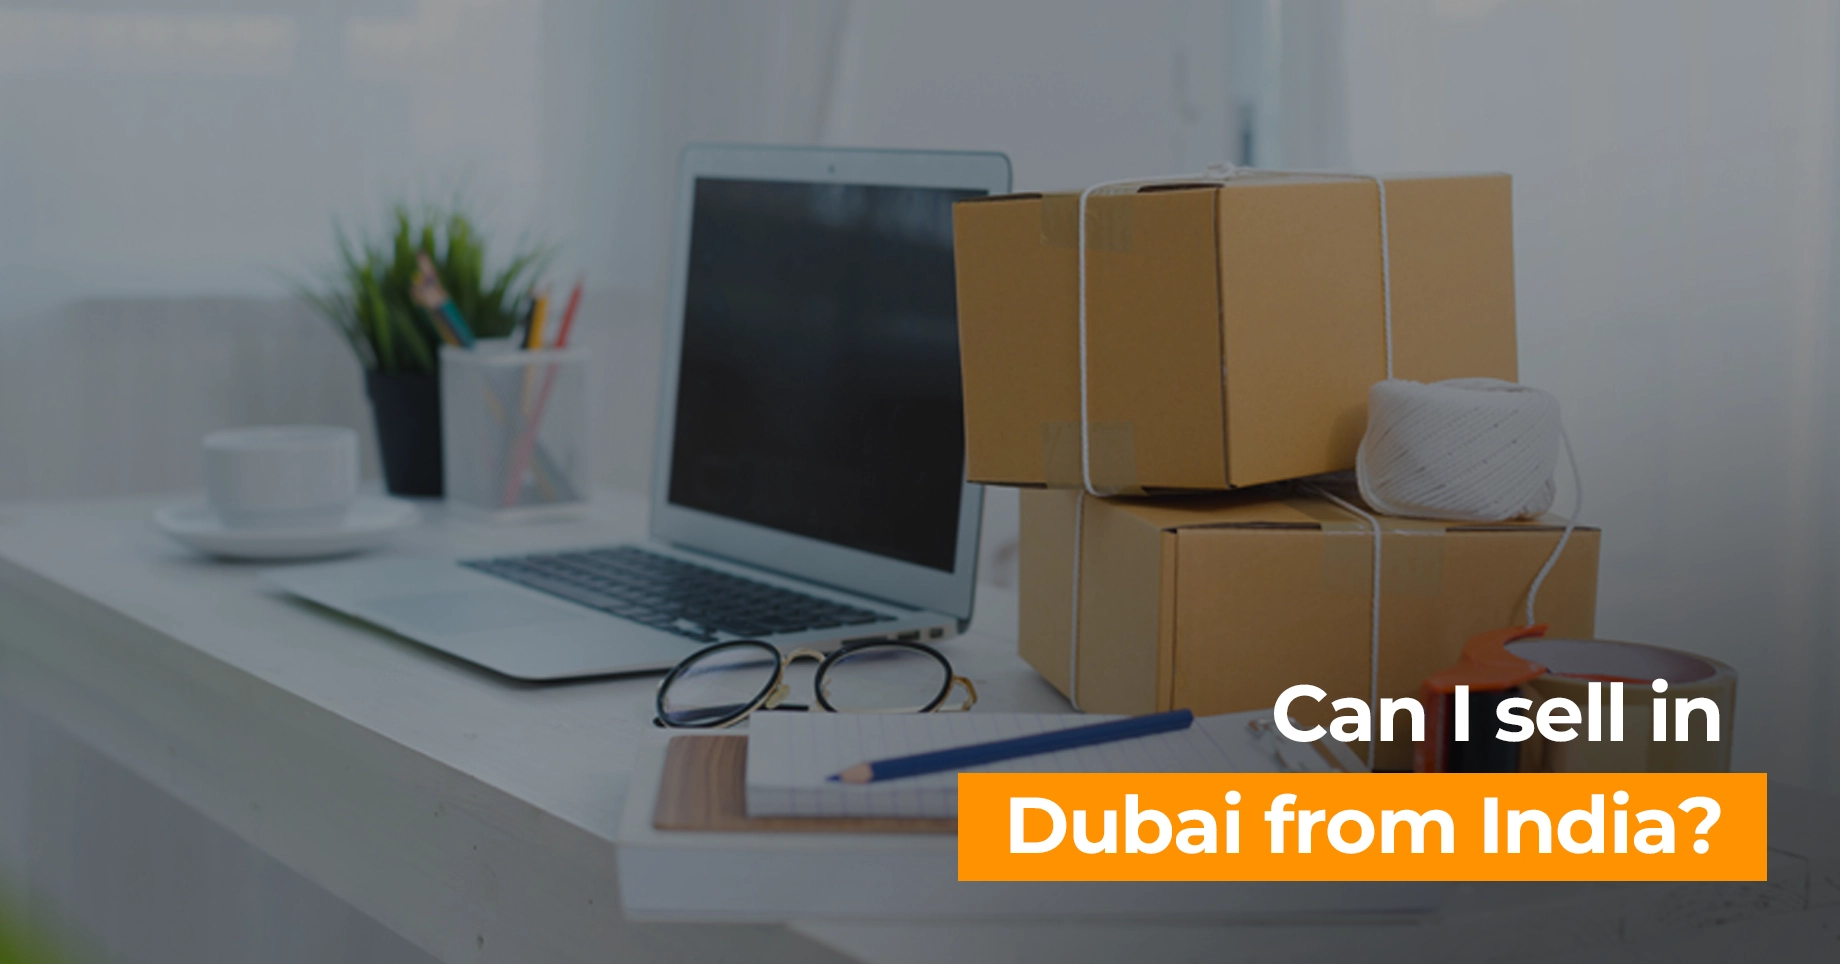 Can I sell in Dubai from India?